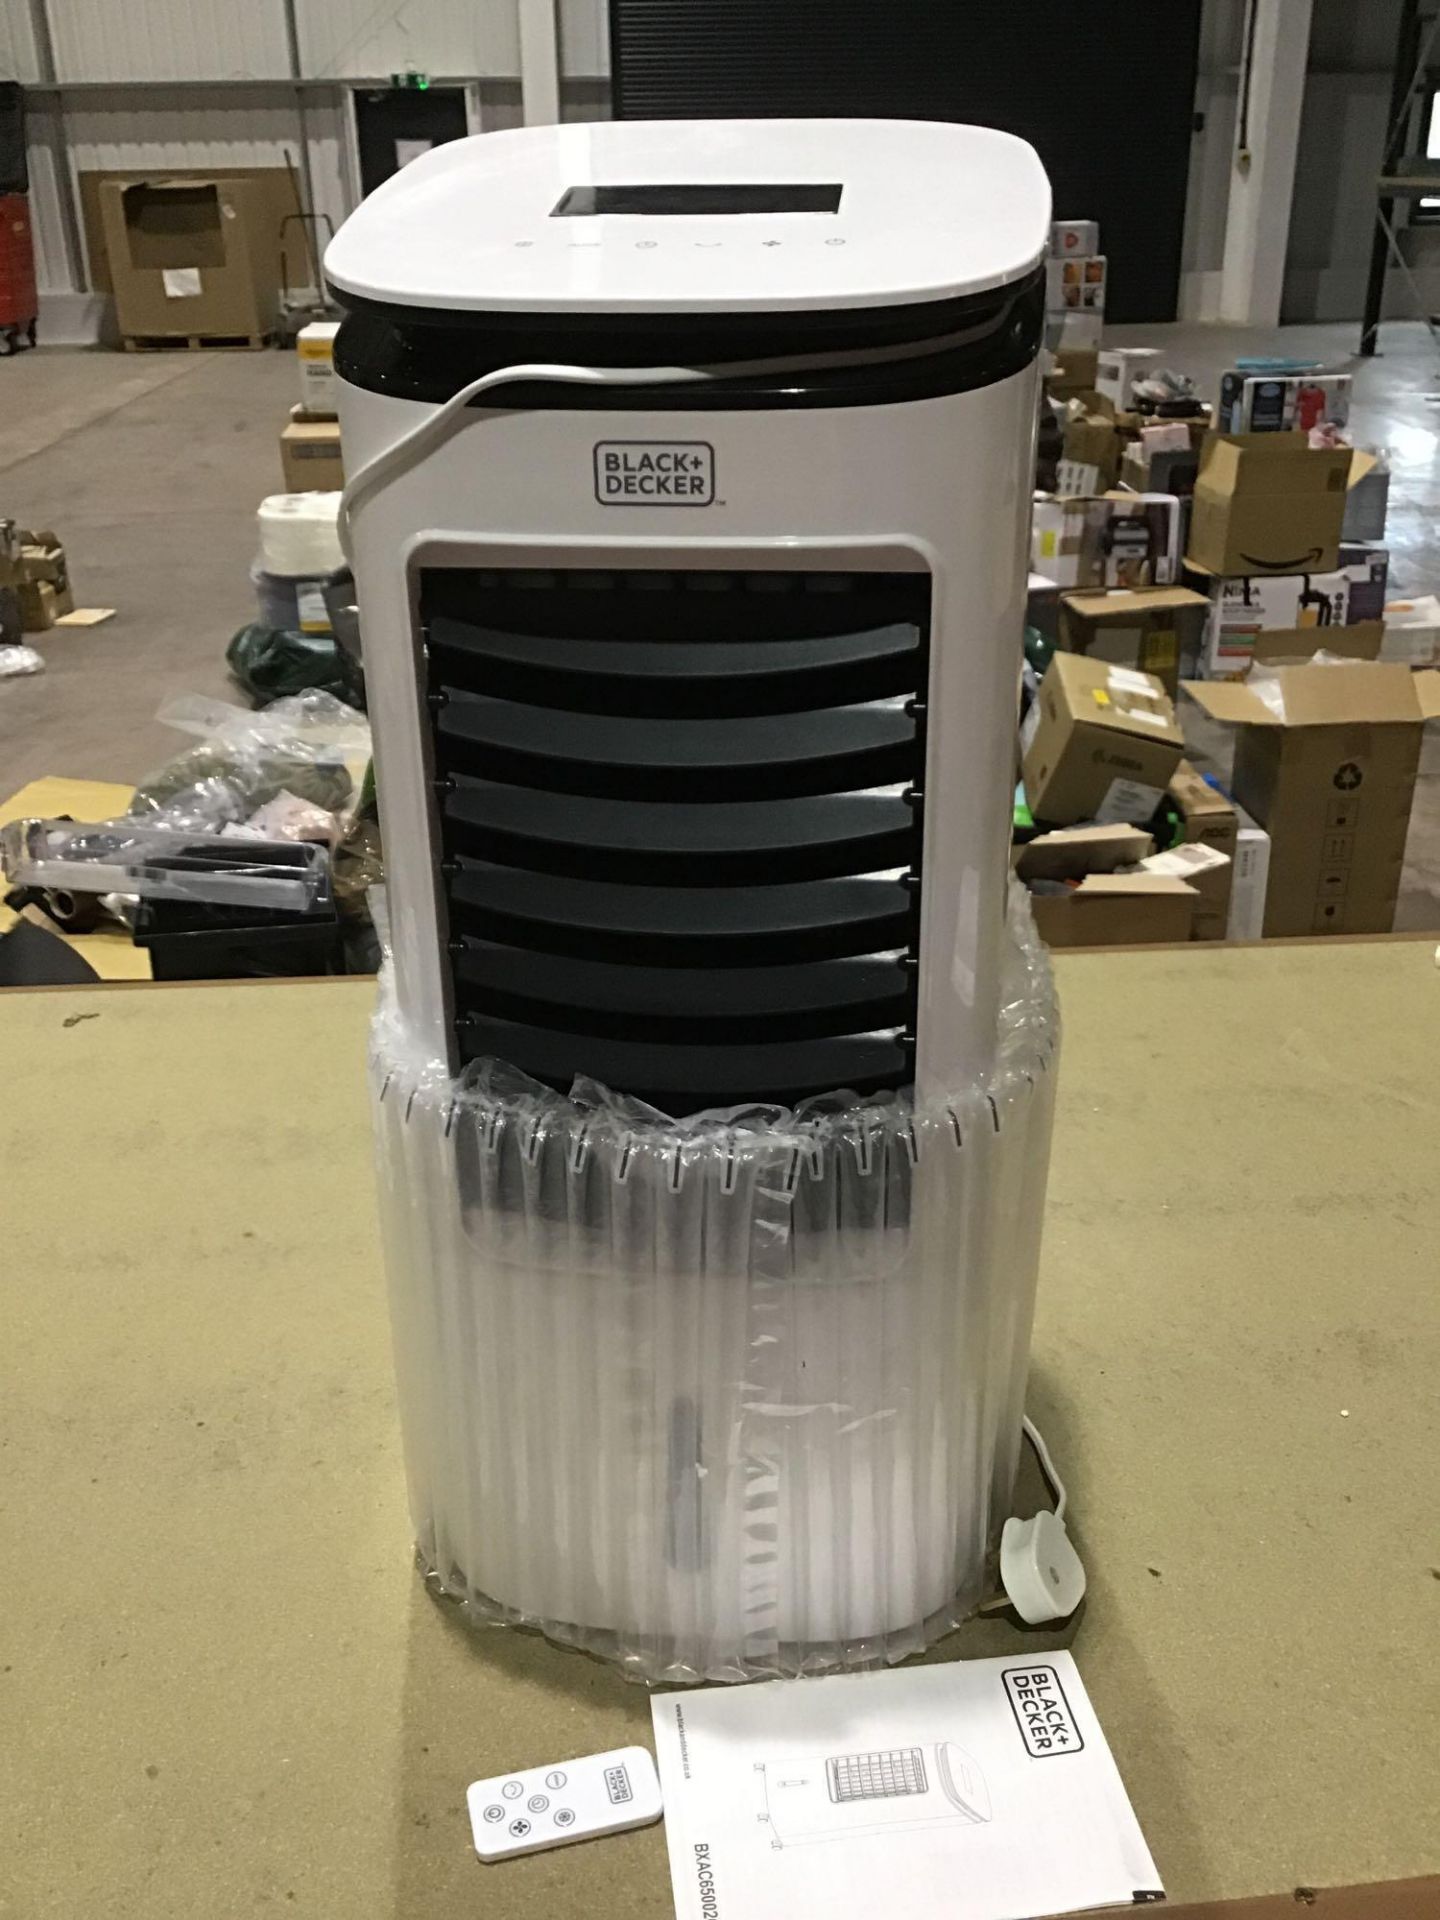 Back+Decker BXAC65002GB Digital Air Cooler, 3 Speed Settings with 7 Litre Water Tank £81.18 RRP - Image 2 of 4